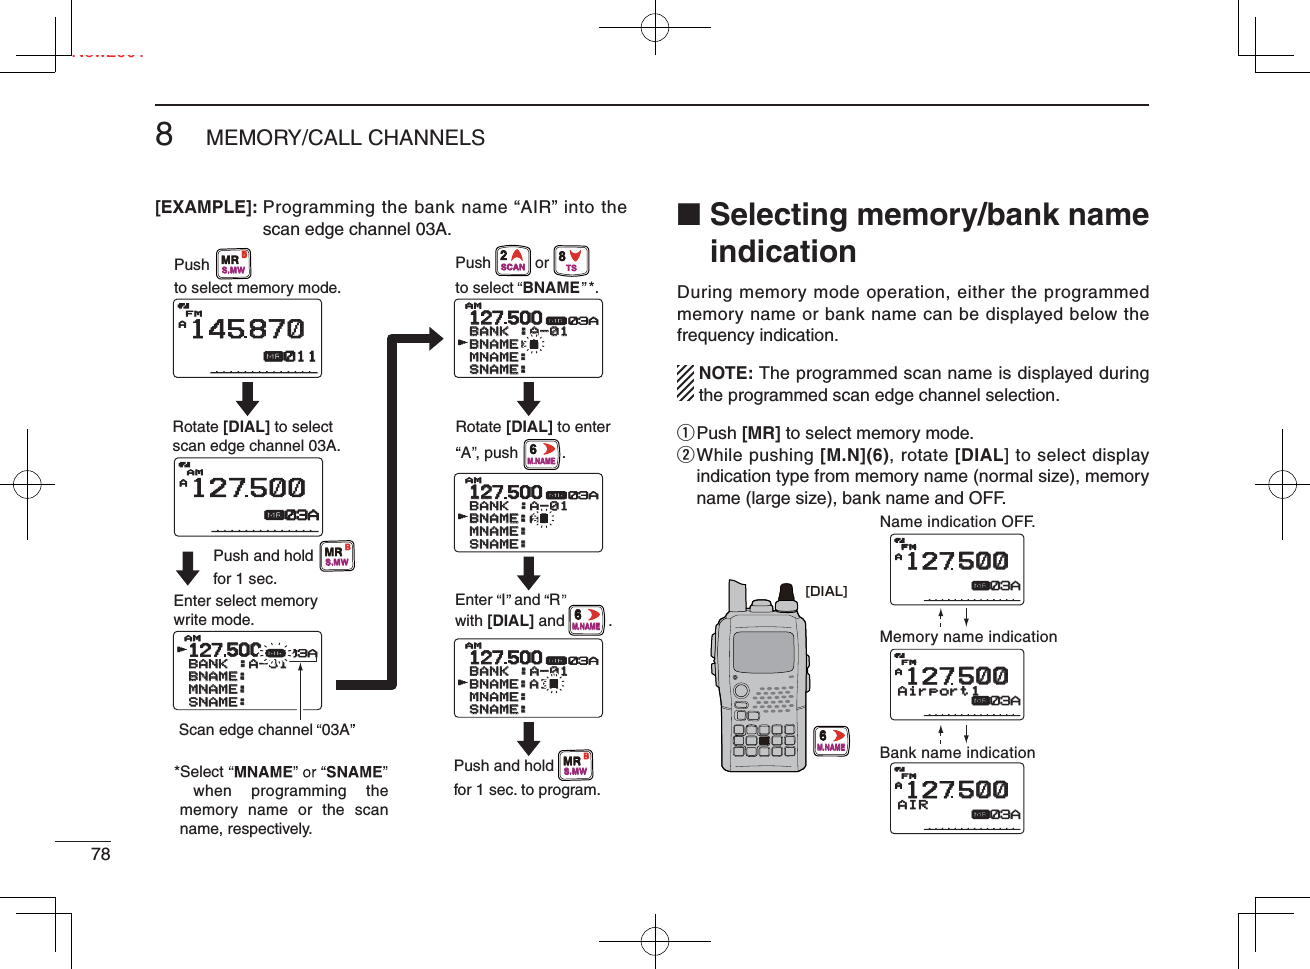 Ne788MEMORY/CALL CHANNELSNew2001[EXAMPLE]:  Programming the bank name “AIR” into the scan edge channel 03A. ■  Selecting memory/bank name indicationDuring memory mode operation, either the programmed memory name or bank name can be displayed below the frequency indication.  NOTE: The programmed scan name is displayed during  the programmed scan edge channel selection.q Push  [MR] to select memory mode.w  While pushing [M.N](6), rotate [DIAL] to select display indication type from memory name (normal size), memory name (large size), bank name and OFF.127500500BANKBANK :A-01:A-01BNAME:  BNAME:  MNAME:MNAME:SNAME:SNAME:AMAMrμ03AAμAM12750003AAμFM14587087001112127500BANKBANK :A-01:A-01BNAME:AIR BNAME:AIR MNAME:MNAME:SNAME:SNAME:AMAMrμ03A12127500BANKBANK :A-01:A-01BNAME:AI BNAME:AI MNAME:MNAME:SNAME:SNAME:AMAMrμ03A12127500BANKBANK :A-01:A-01BNAME:A BNAME:A MNAME:MNAME:SNAME:SNAME:AMAMrμ03AEnter select memory write mode.Push and holdfor 1 sec.Push and holdfor 1 sec. to program.Pushto select memory mode.Rotate [DIAL] to selectscan edge channel 03A.Pushto select  BNAME  *.orScan edge channel  03ARotate [DIAL] to enterA , push          . Enter  I  and  Rwith [DIAL] and          .*Select when programming the memory name or the scan name, respectively.MRS.MWBMRS.MWBMRS.MWB2SCAN8TS6M.NAME6M.NAMEAAAIRAIRμFM12750050003A03AAAirport1Airport1μFM12750050003A03AAμFMFM12750050003A03AName indication OFF.Memory name indicationBank name indication[DIAL]6M.NAME